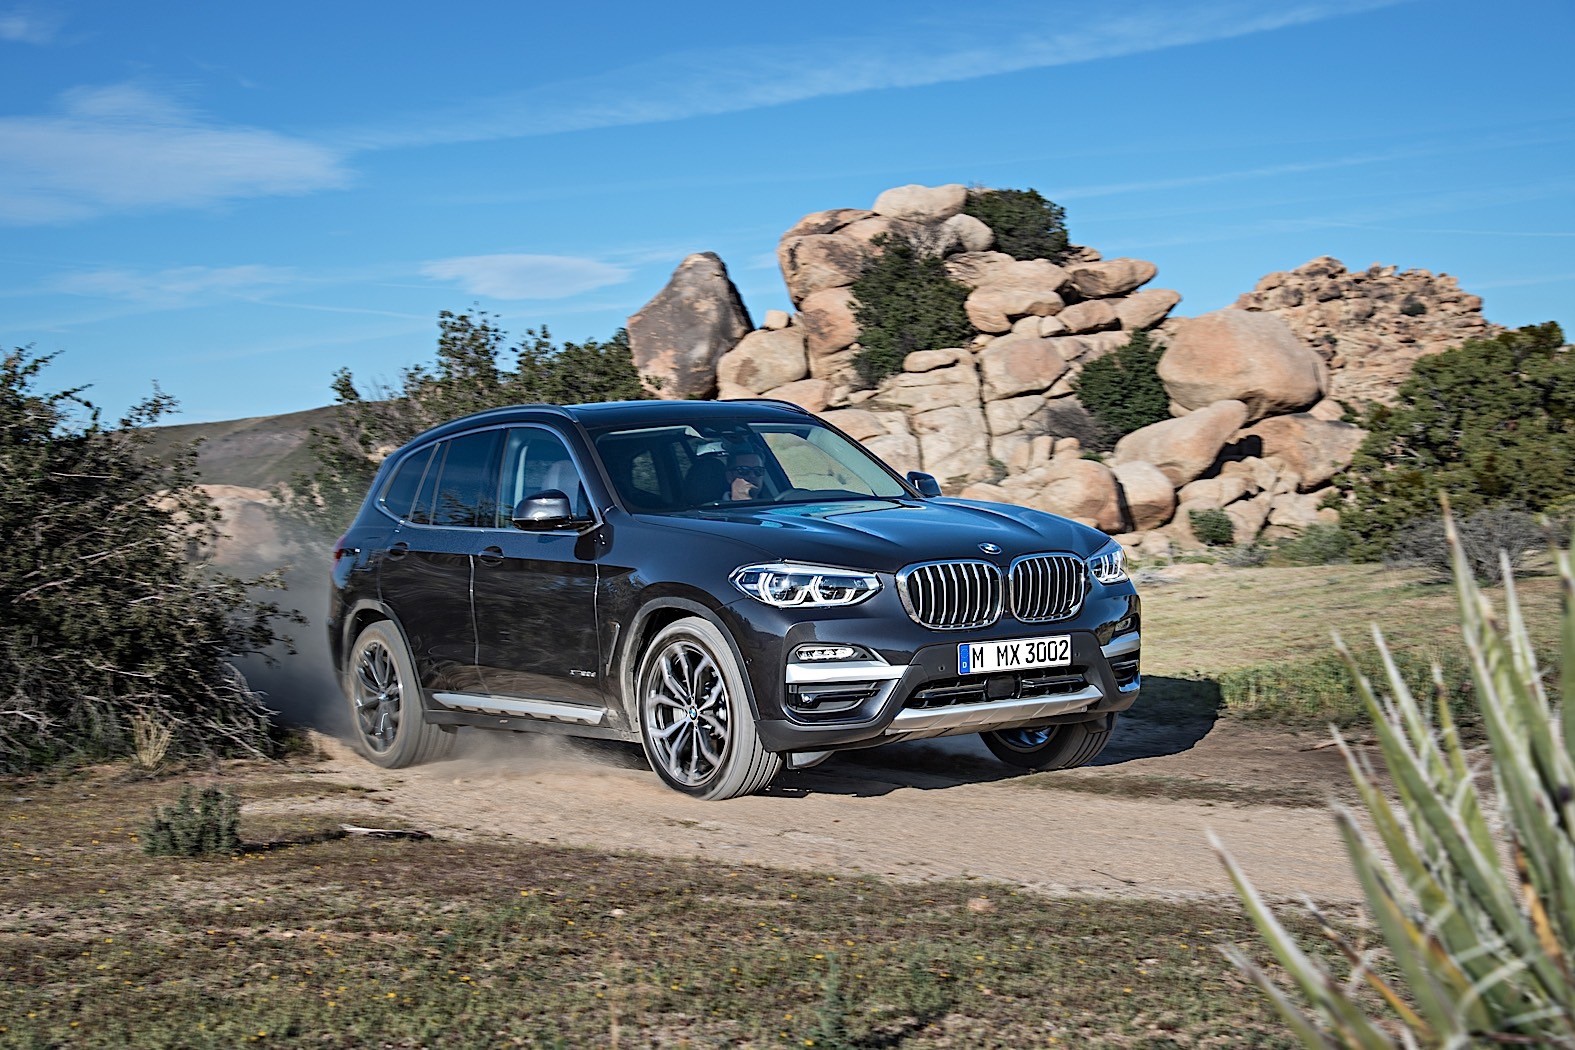 2018 BMW X3 (G01) Priced In The U.S. From 42,450 For The